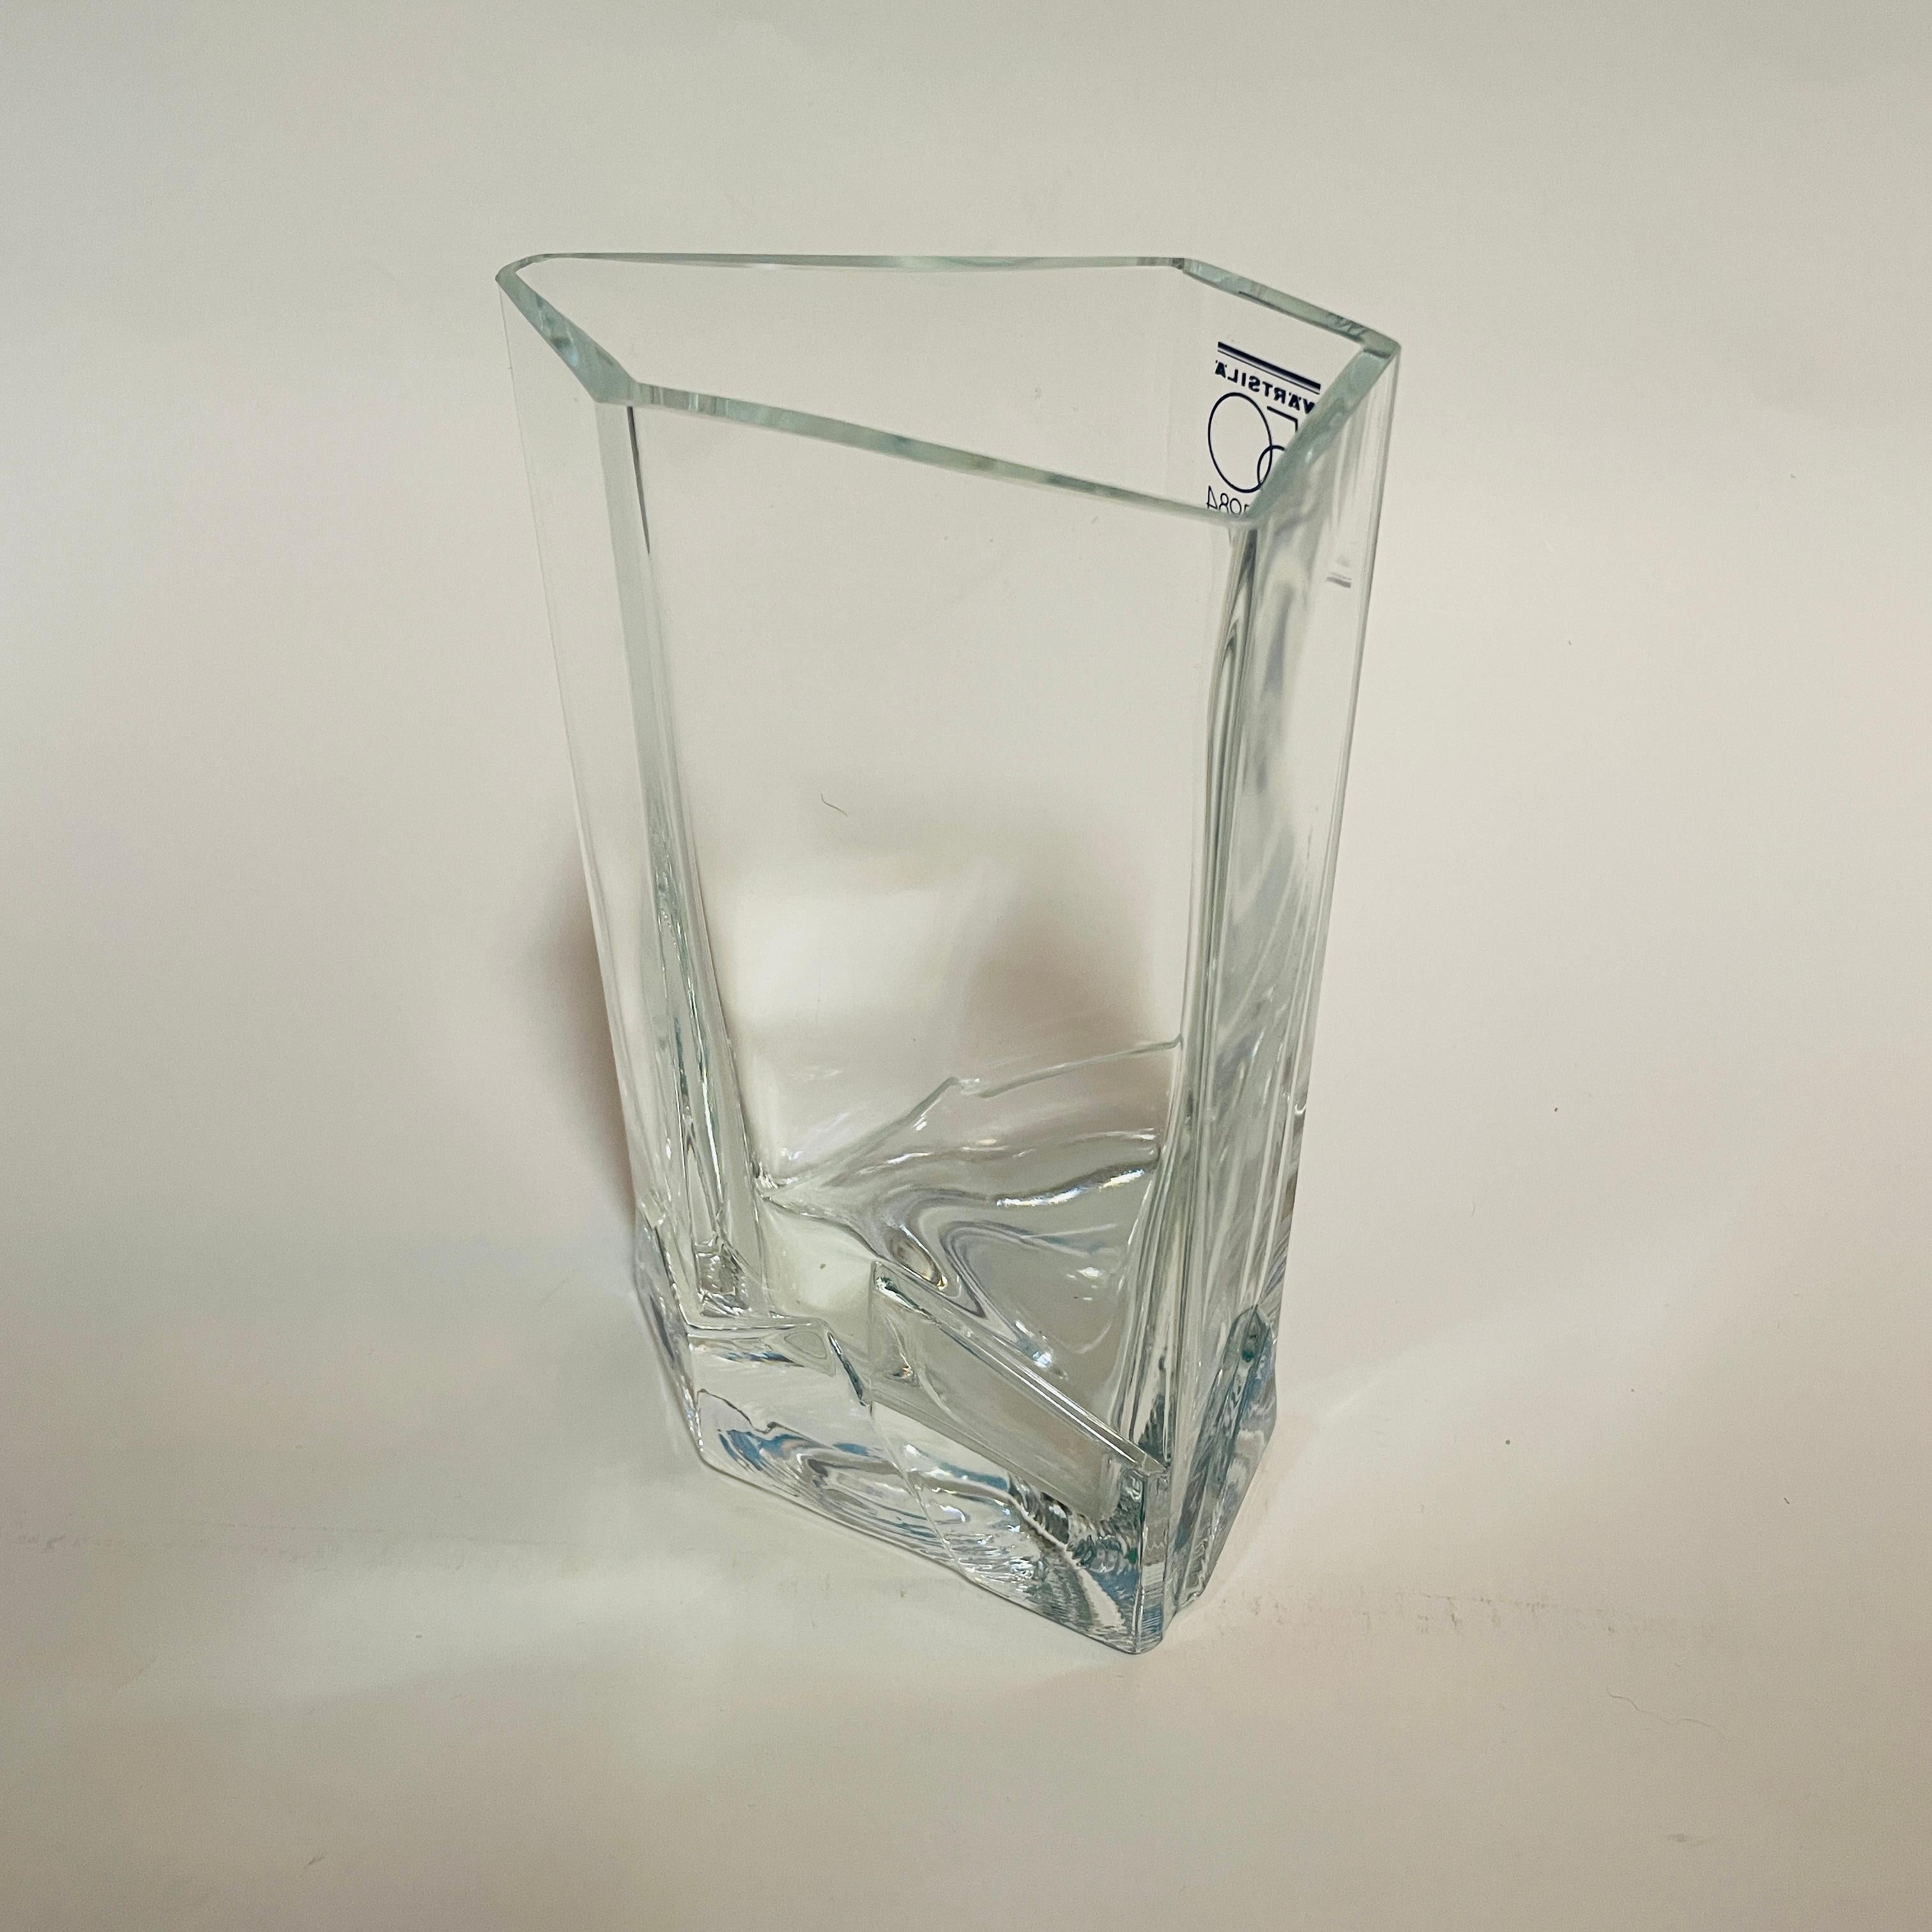 Scandinavian Modern Clear Glass Vase made by Nuutajärvi glassworks Finland in 1984. For Sale